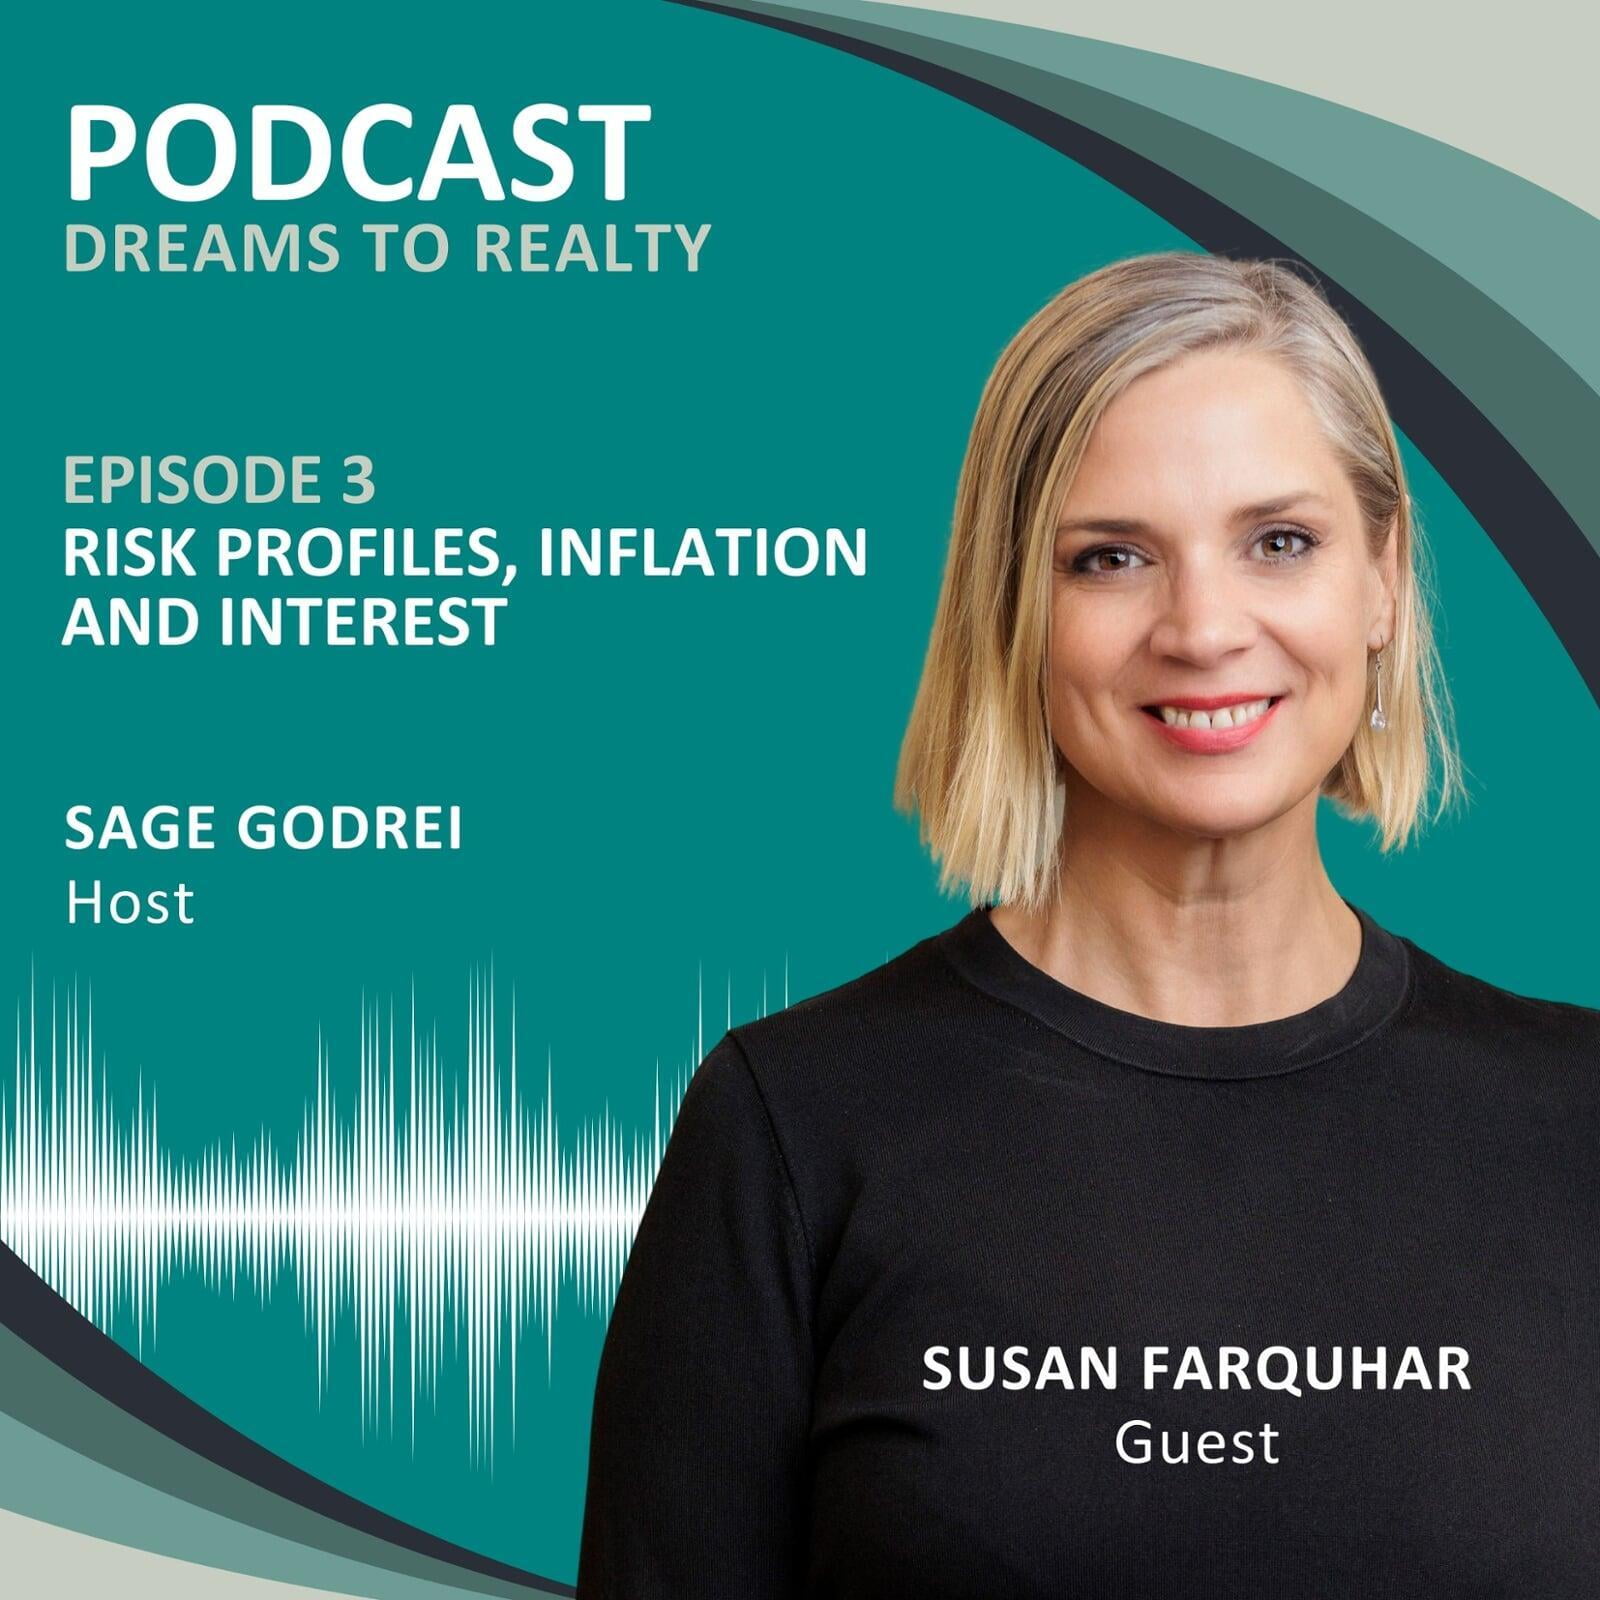 PODCAST: Dreams to Realty Property Investment Insights - Episode 3 Risk Profiles, Inflation And Interest